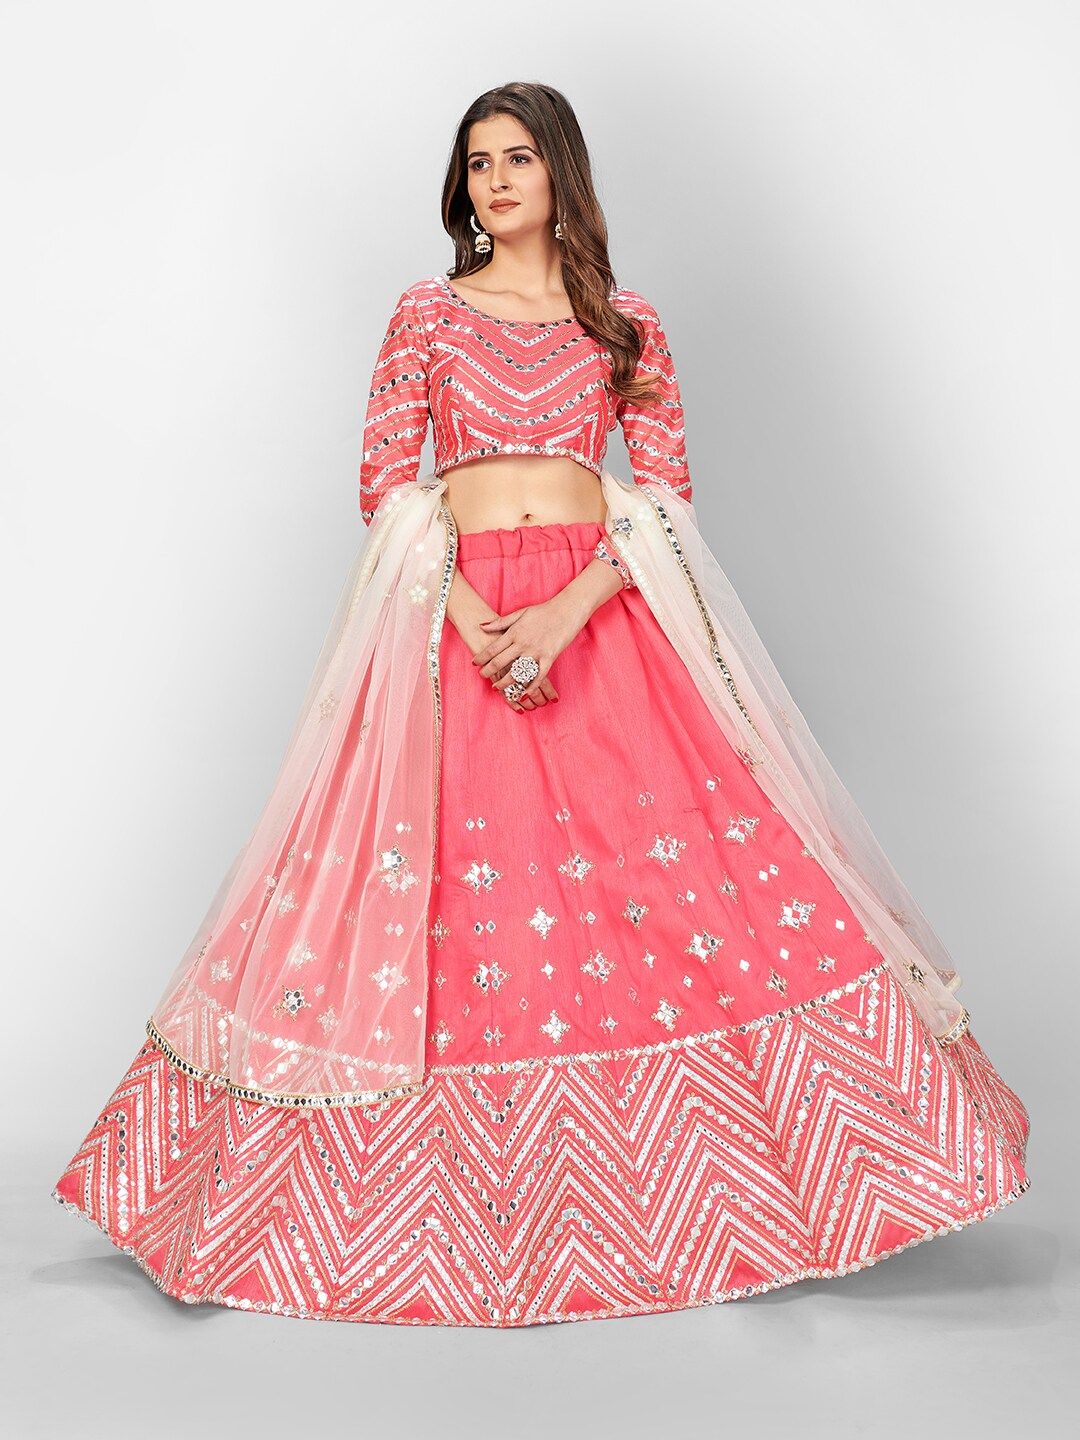 SHOPGARB Pink & Steel Embellished Mirror Work Semi-Stitched Lehenga & Unstitched Blouse With Dupatta Price in India